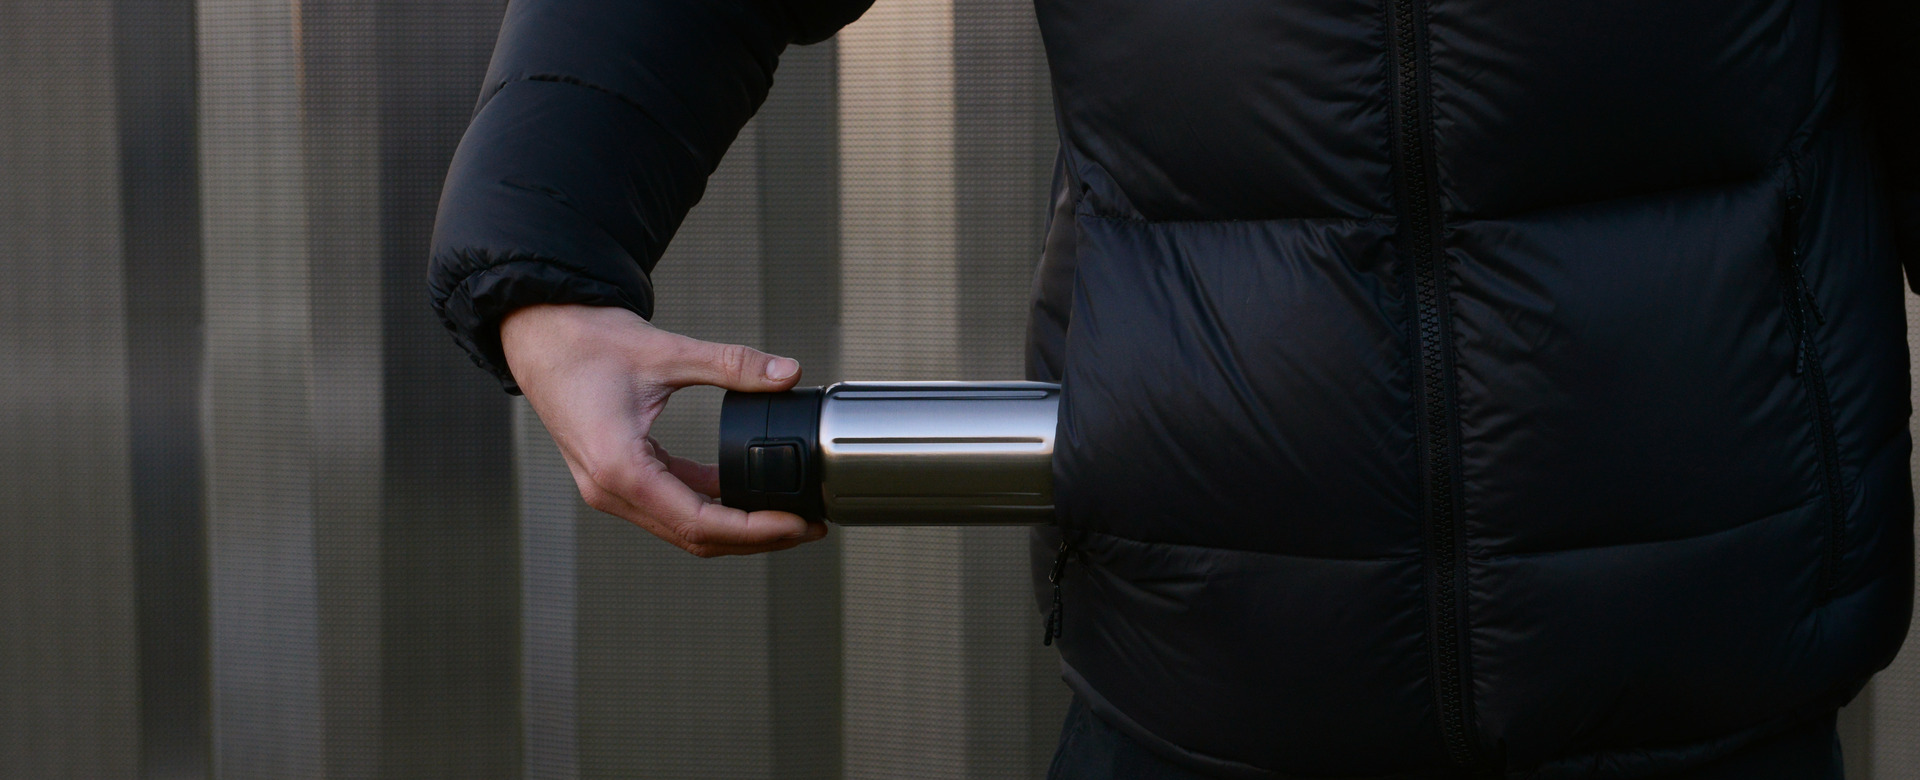 THERMO FLASKS - STYLE AND FUNCTIONALITY